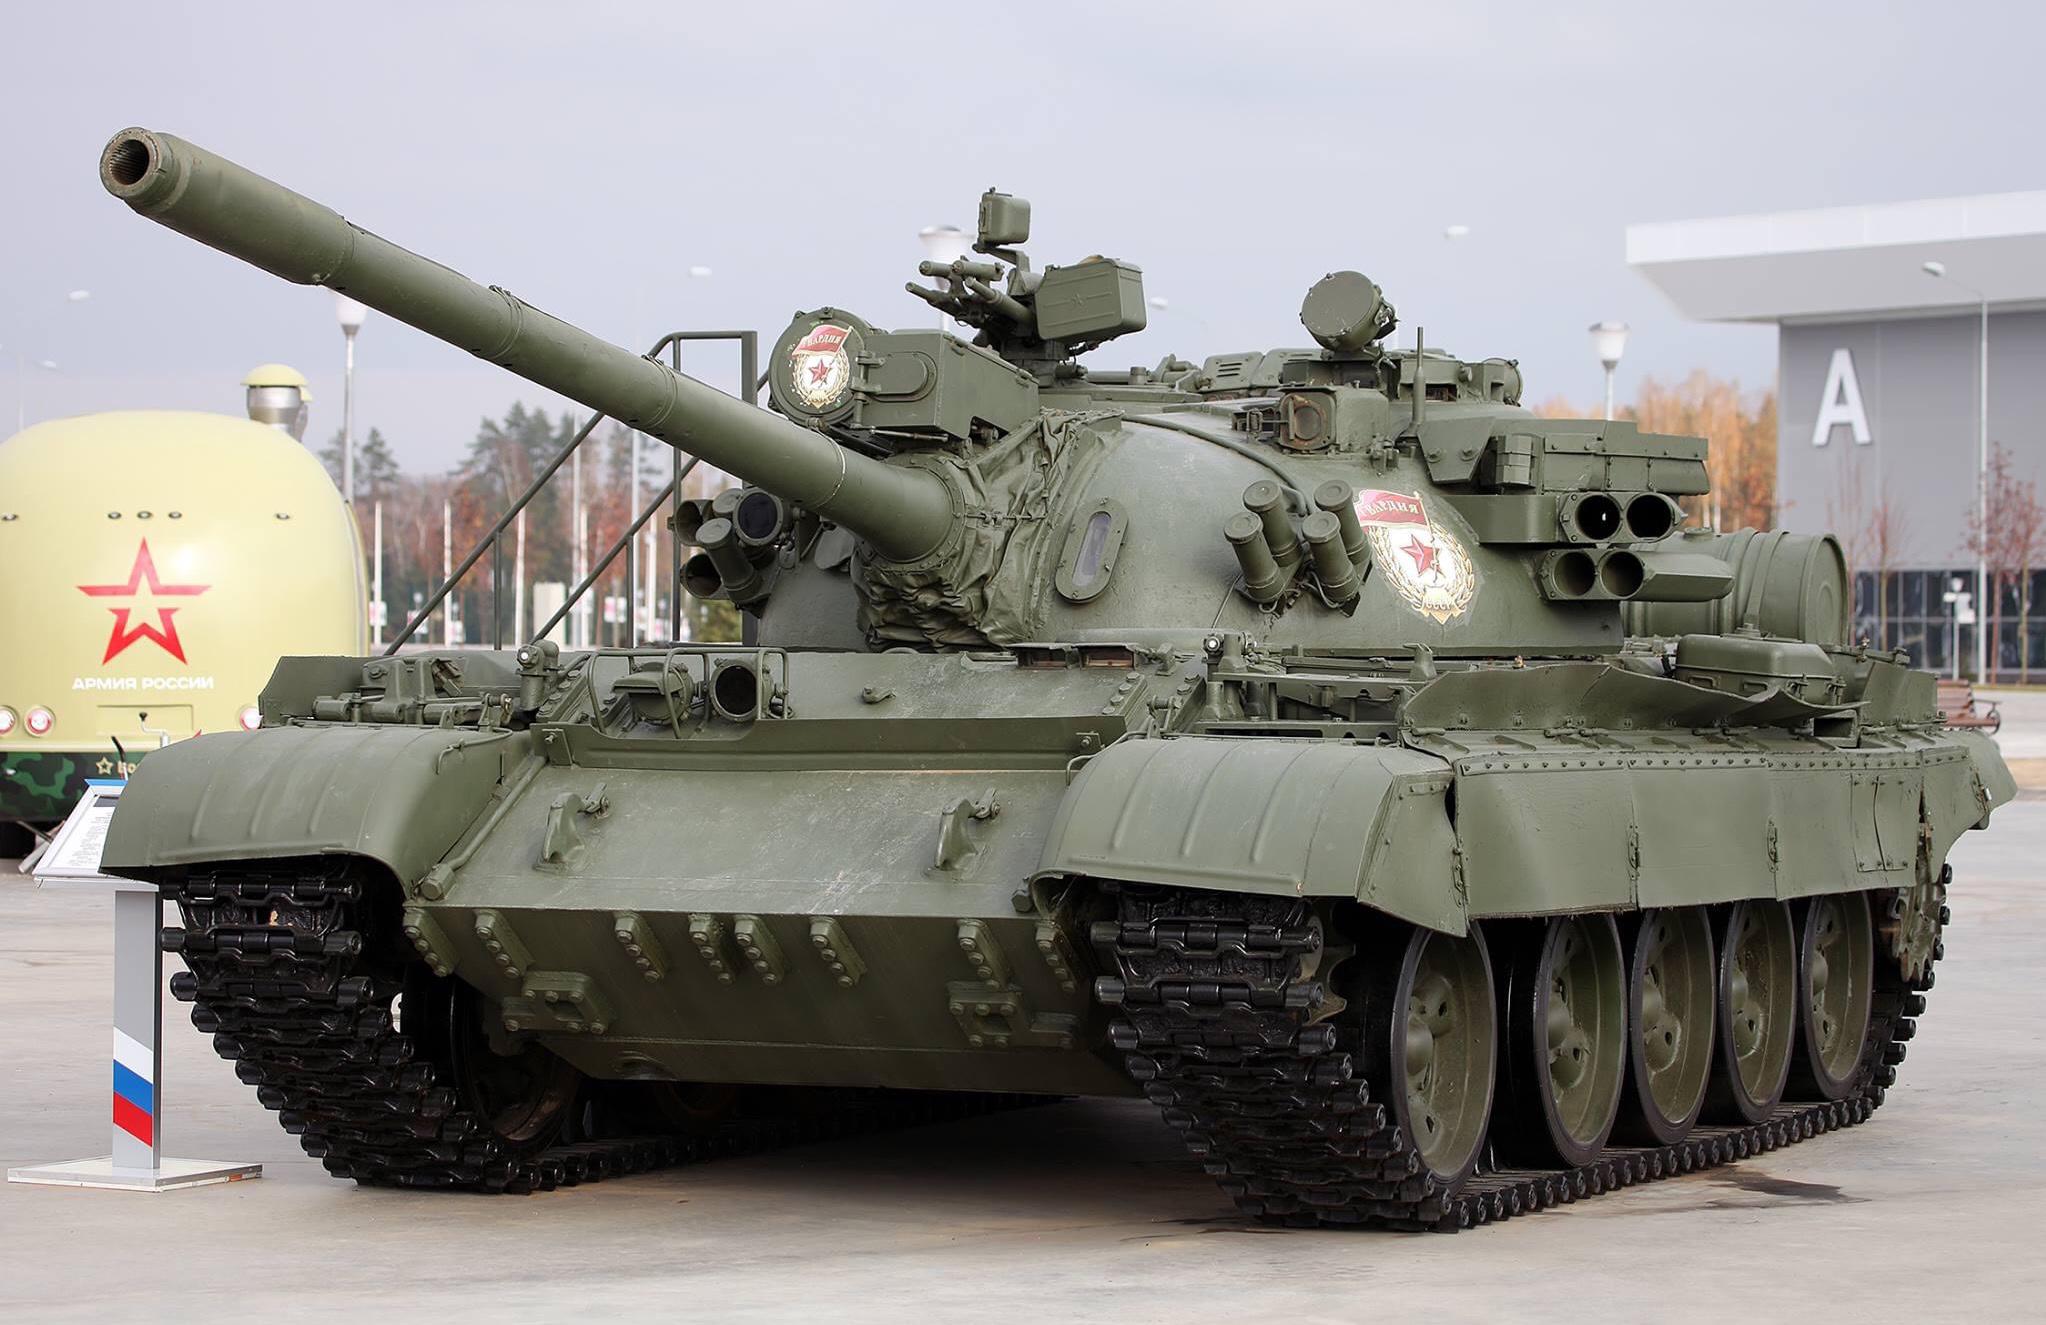 T-55AD equipped with Drozd, the worlds first operational active protection system : r/TankPorn